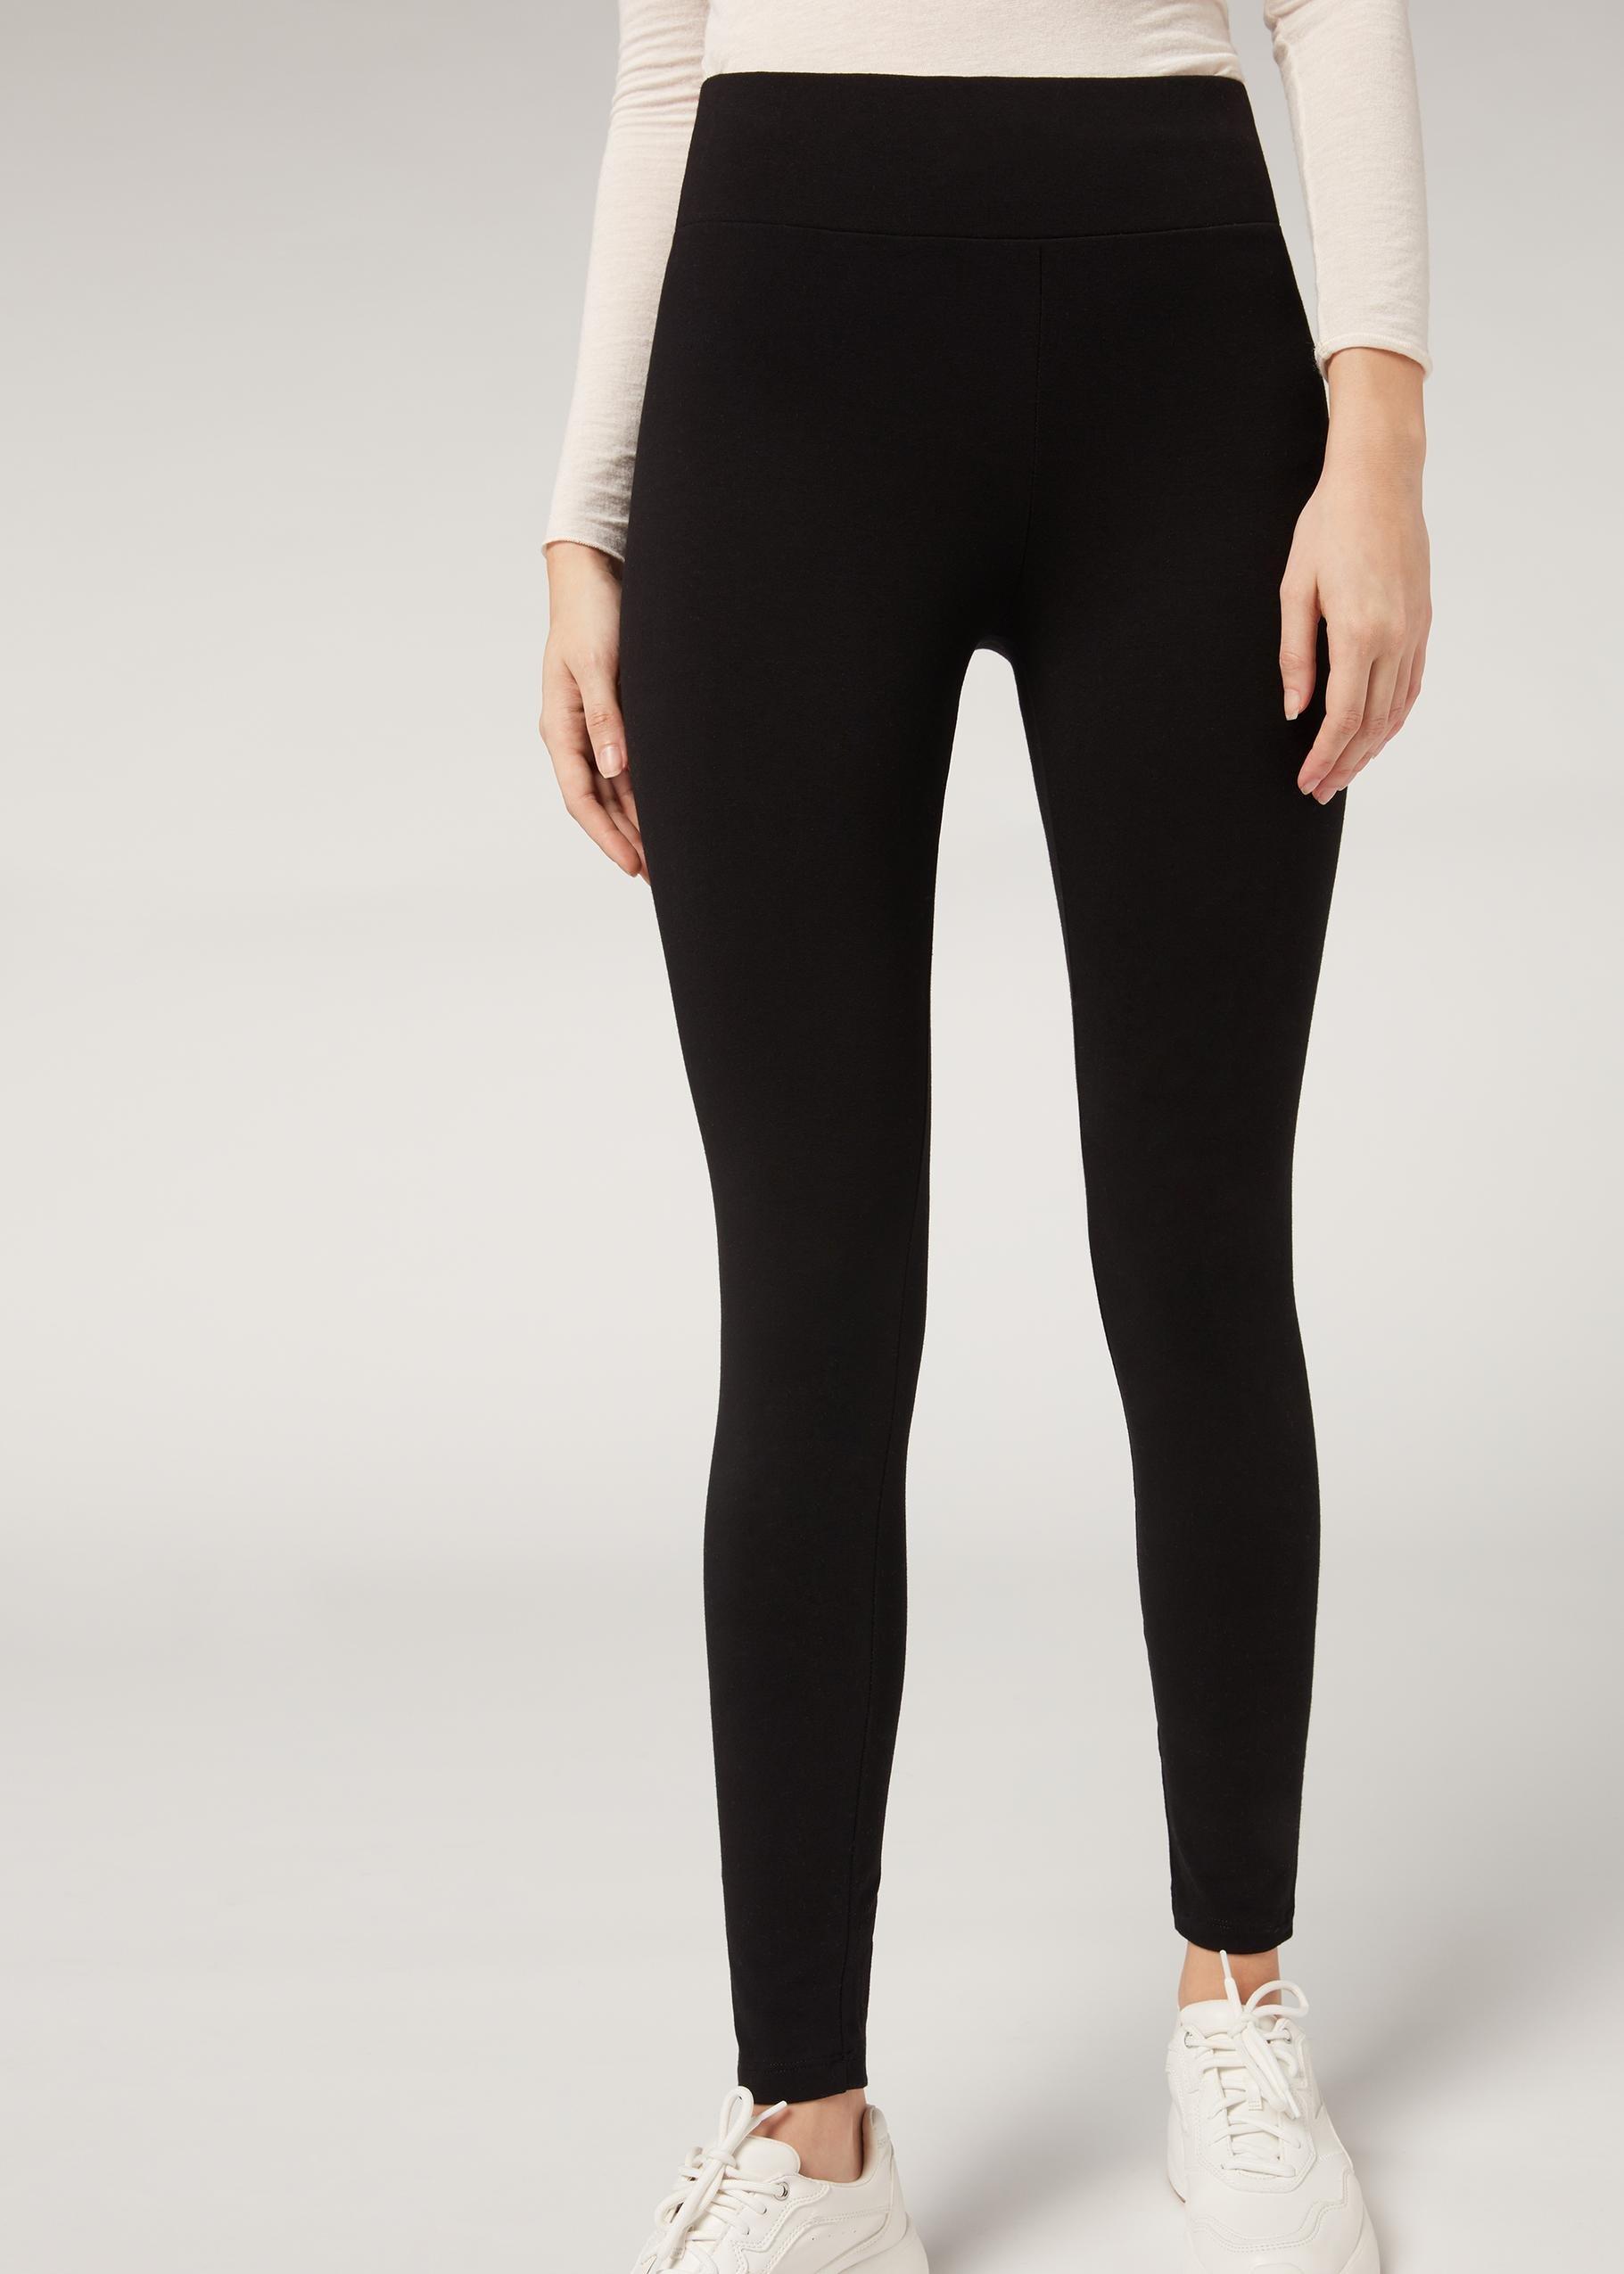 Calzedonia Black Thermal Super Opaque Tights